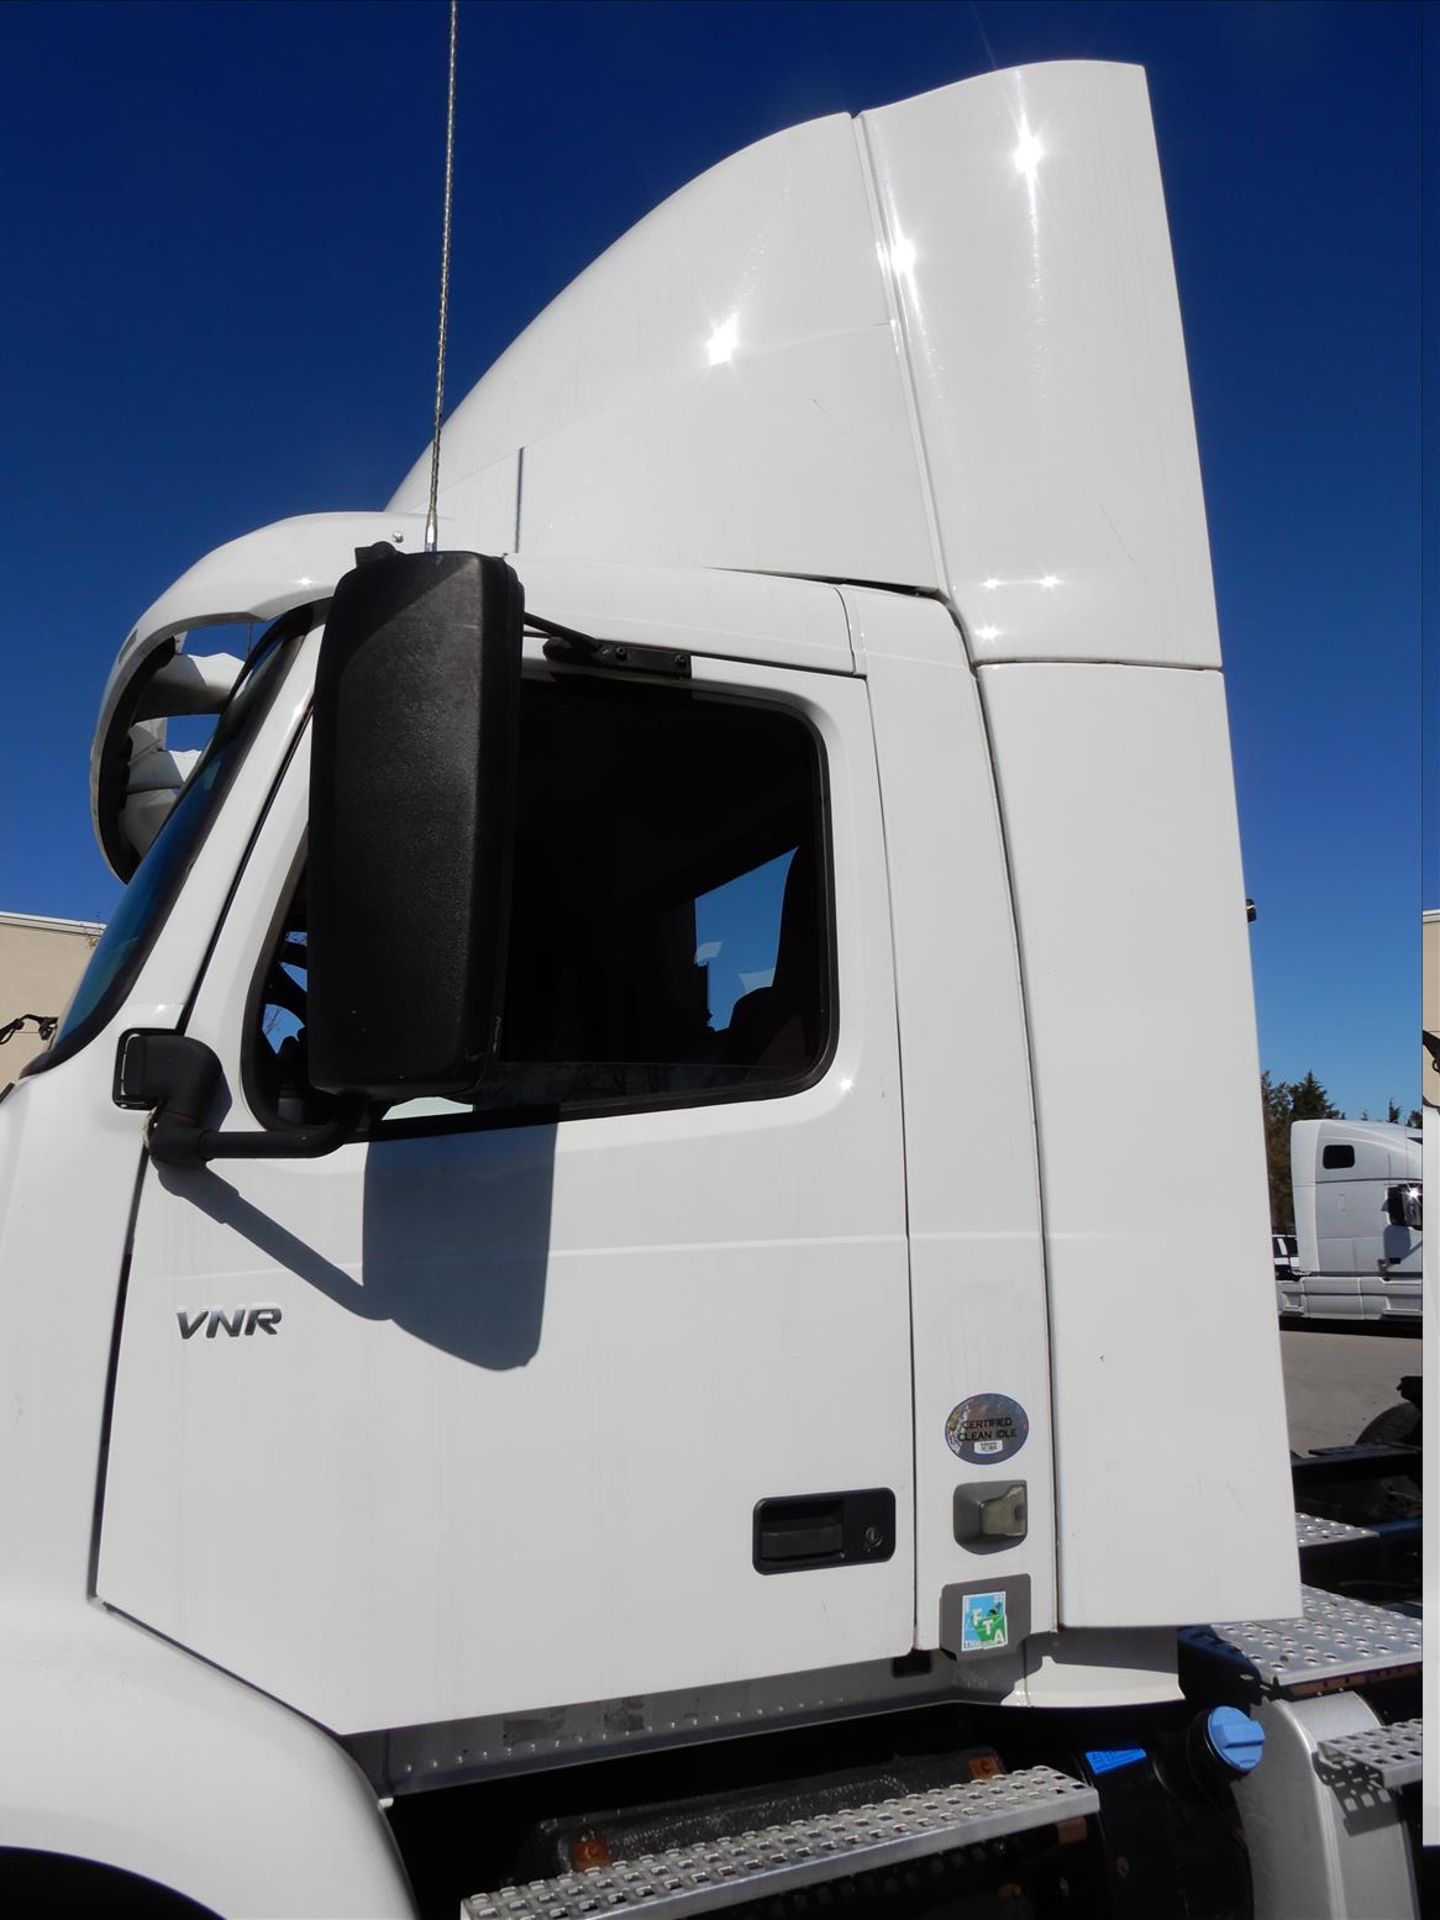 2020 Volvo VNR 300 Daycab Truck Tractor - Located in Murfreesboro, TN - Image 16 of 62